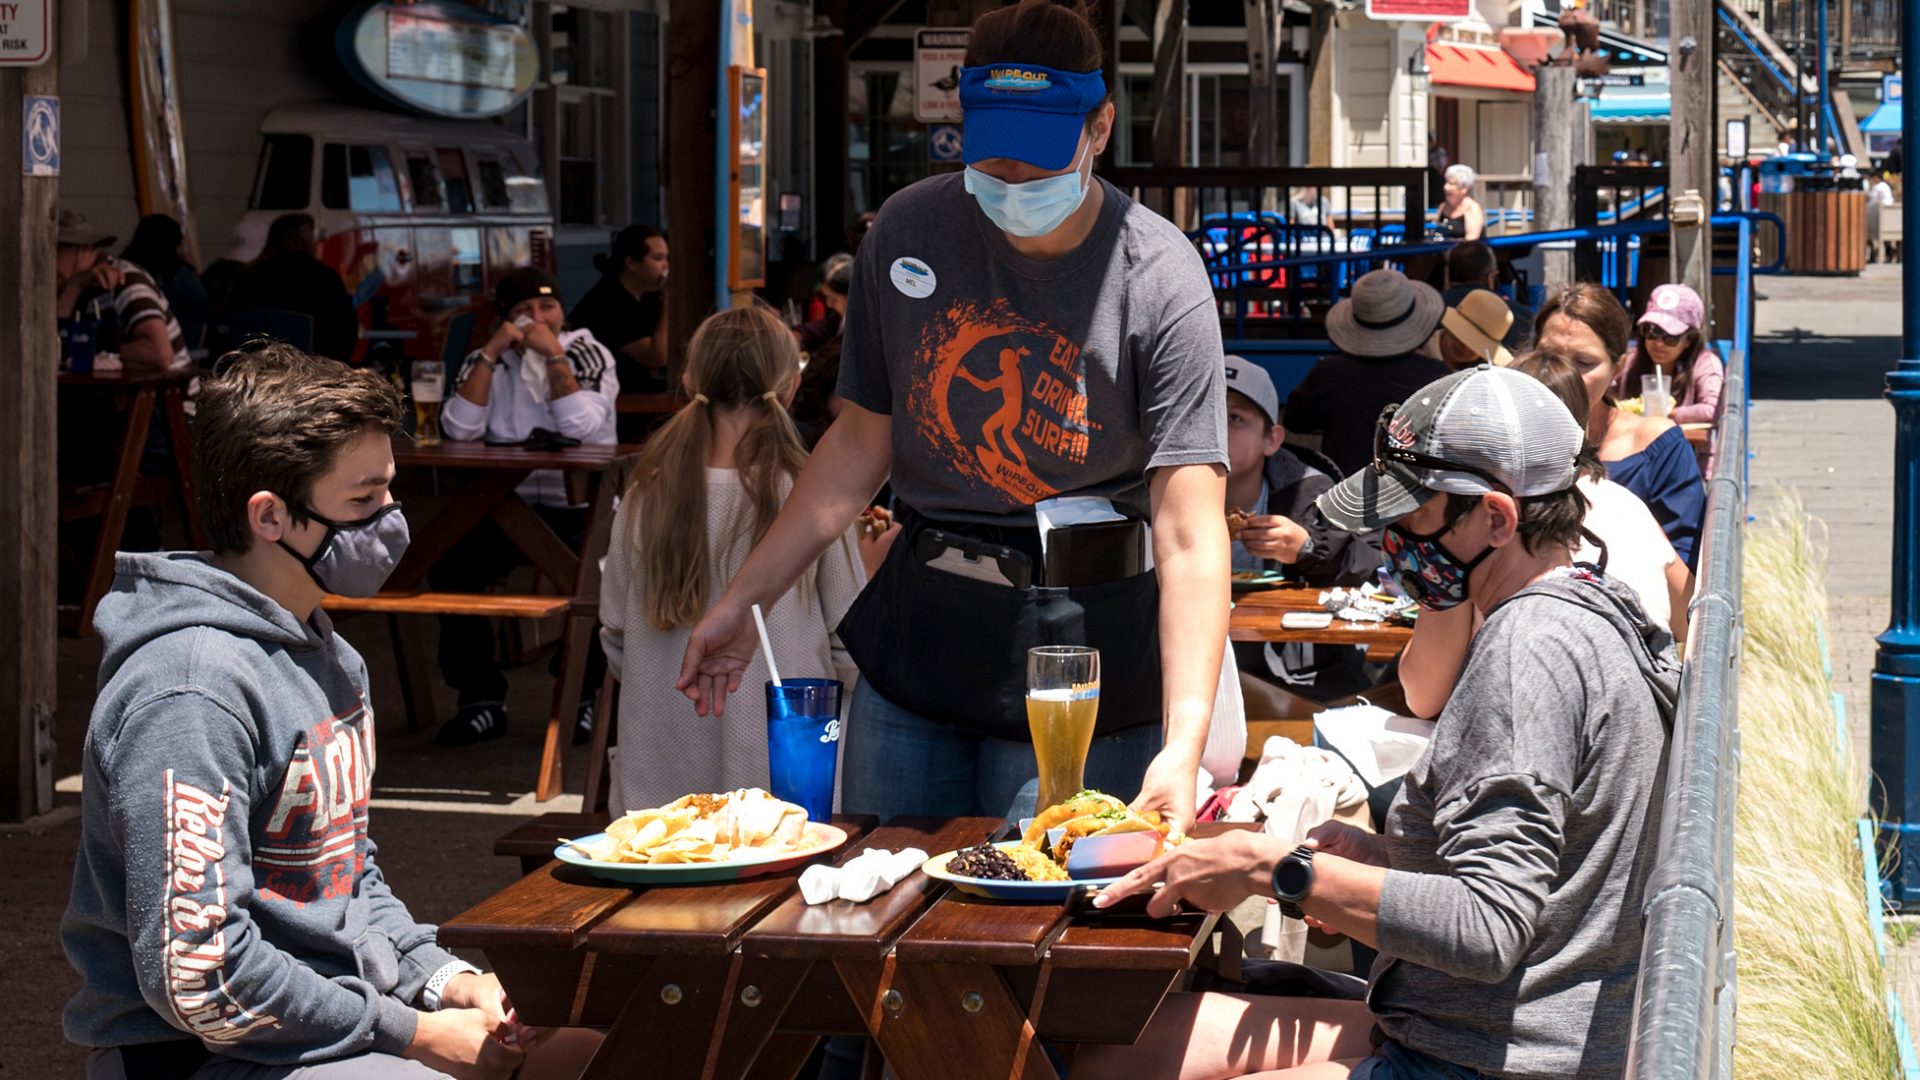 More than 20 U.S. states now require face masks, as officials hope to curb a sharp rise in new coronavirus cases. Here, patrons wear masks as they sit in the outdoor patio of a restaurant on Pier 39 at Fisherman's Wharf in San Francisco.